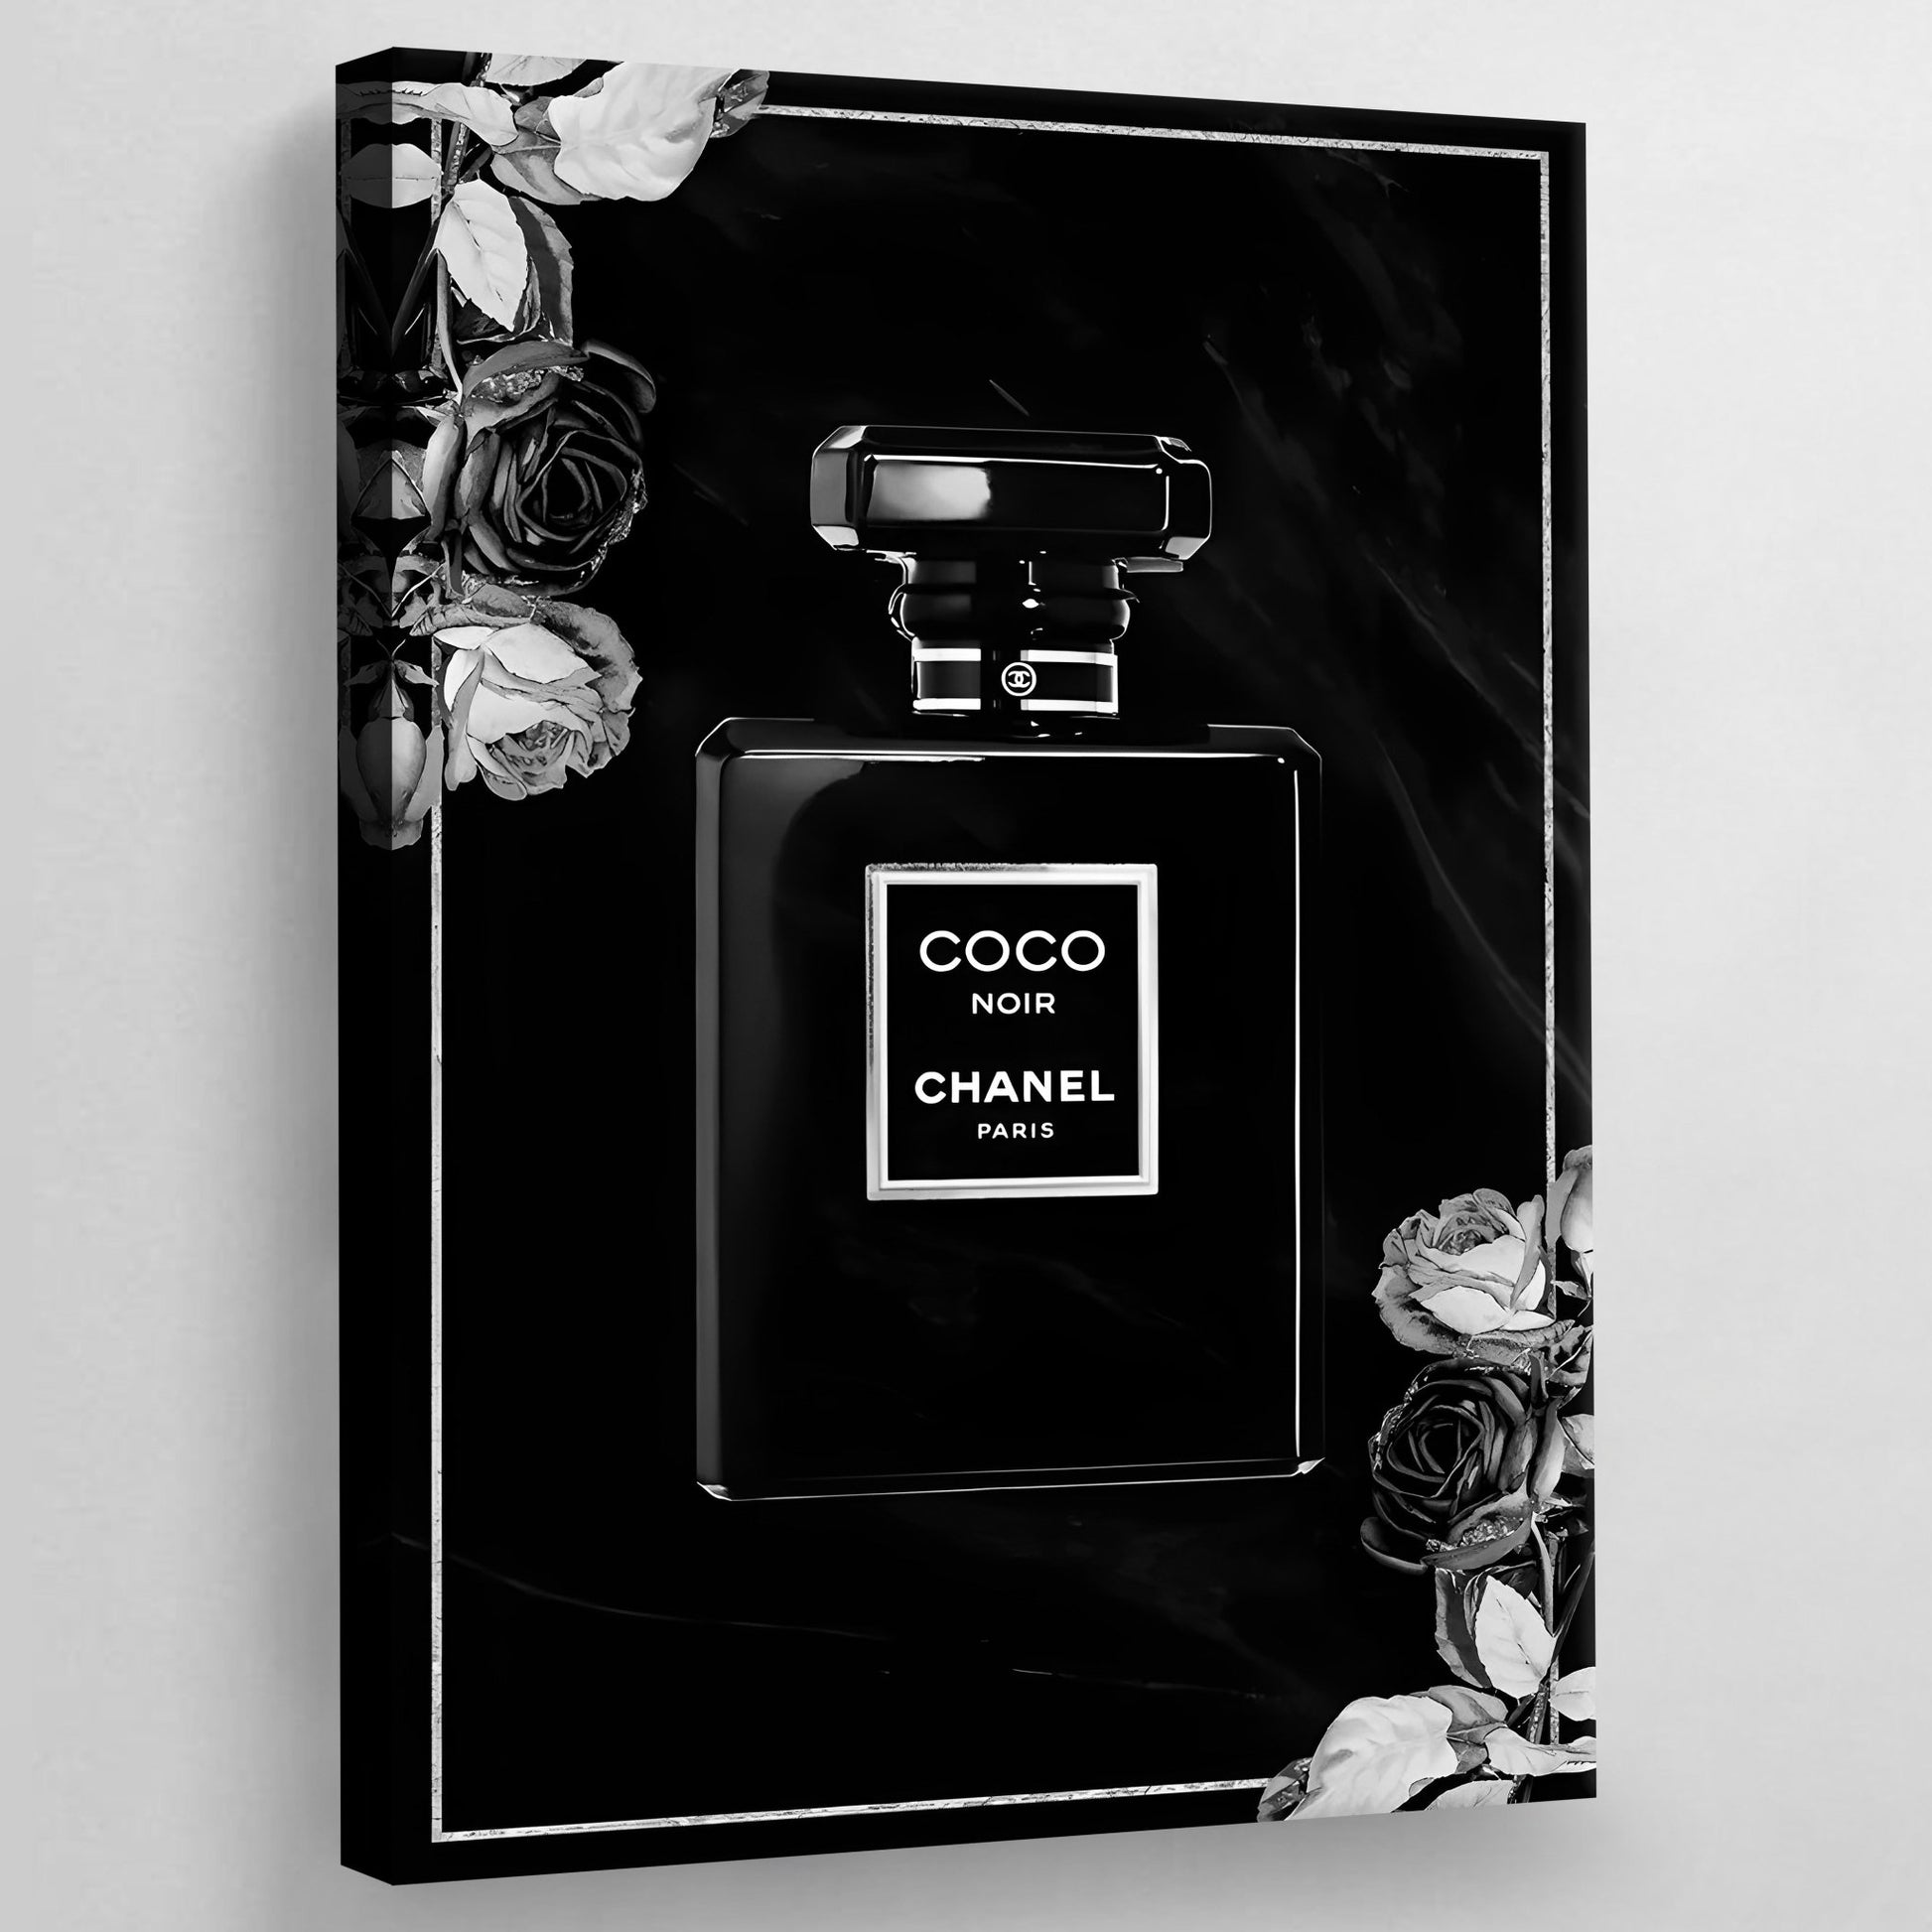 Coco Chanel perfume pink poster 